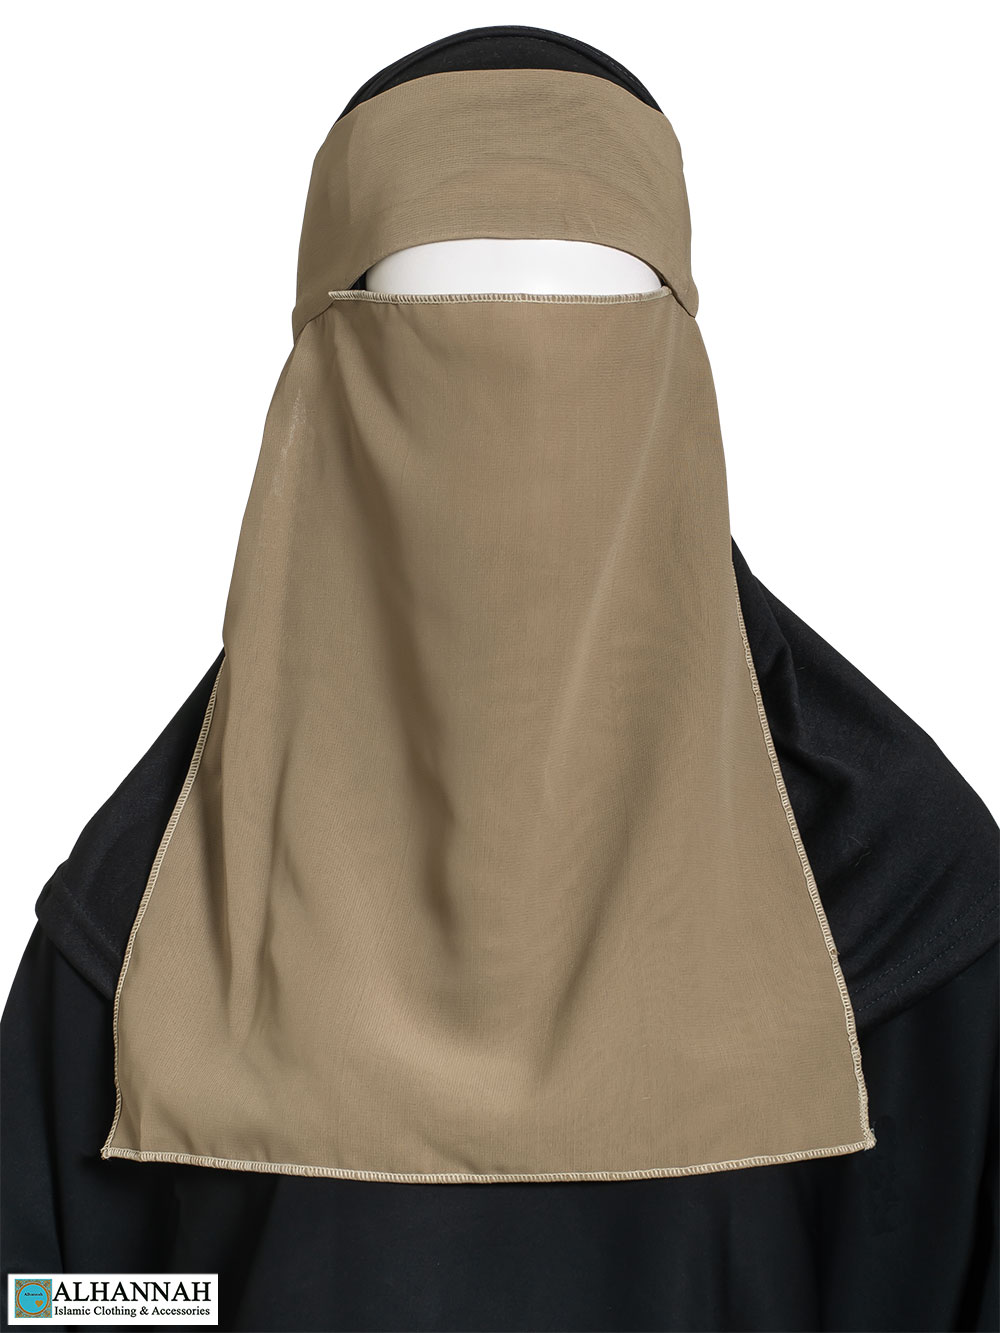 One Layer Niqab with Velcro Fastener - Tan